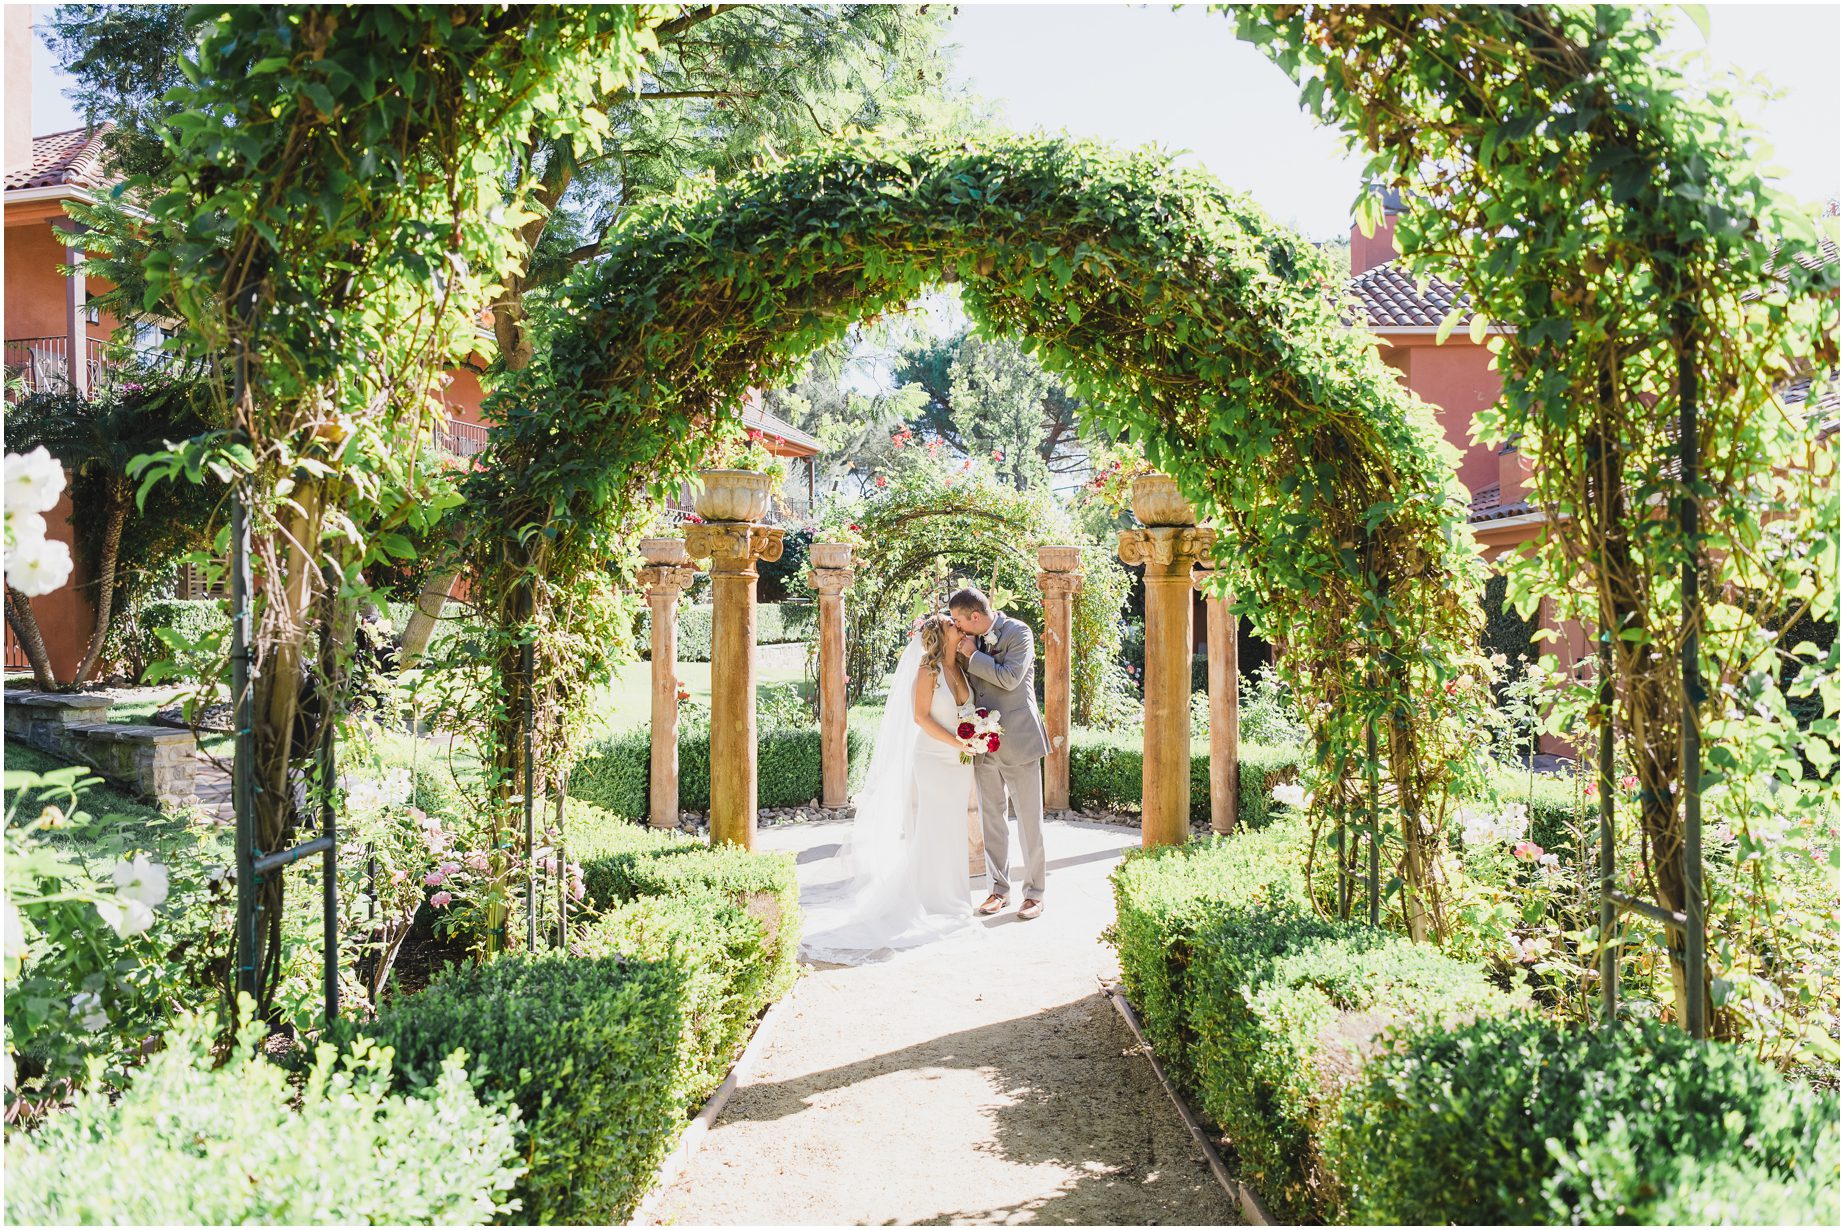 A bride and groom under arches of greenery at Westlake village in